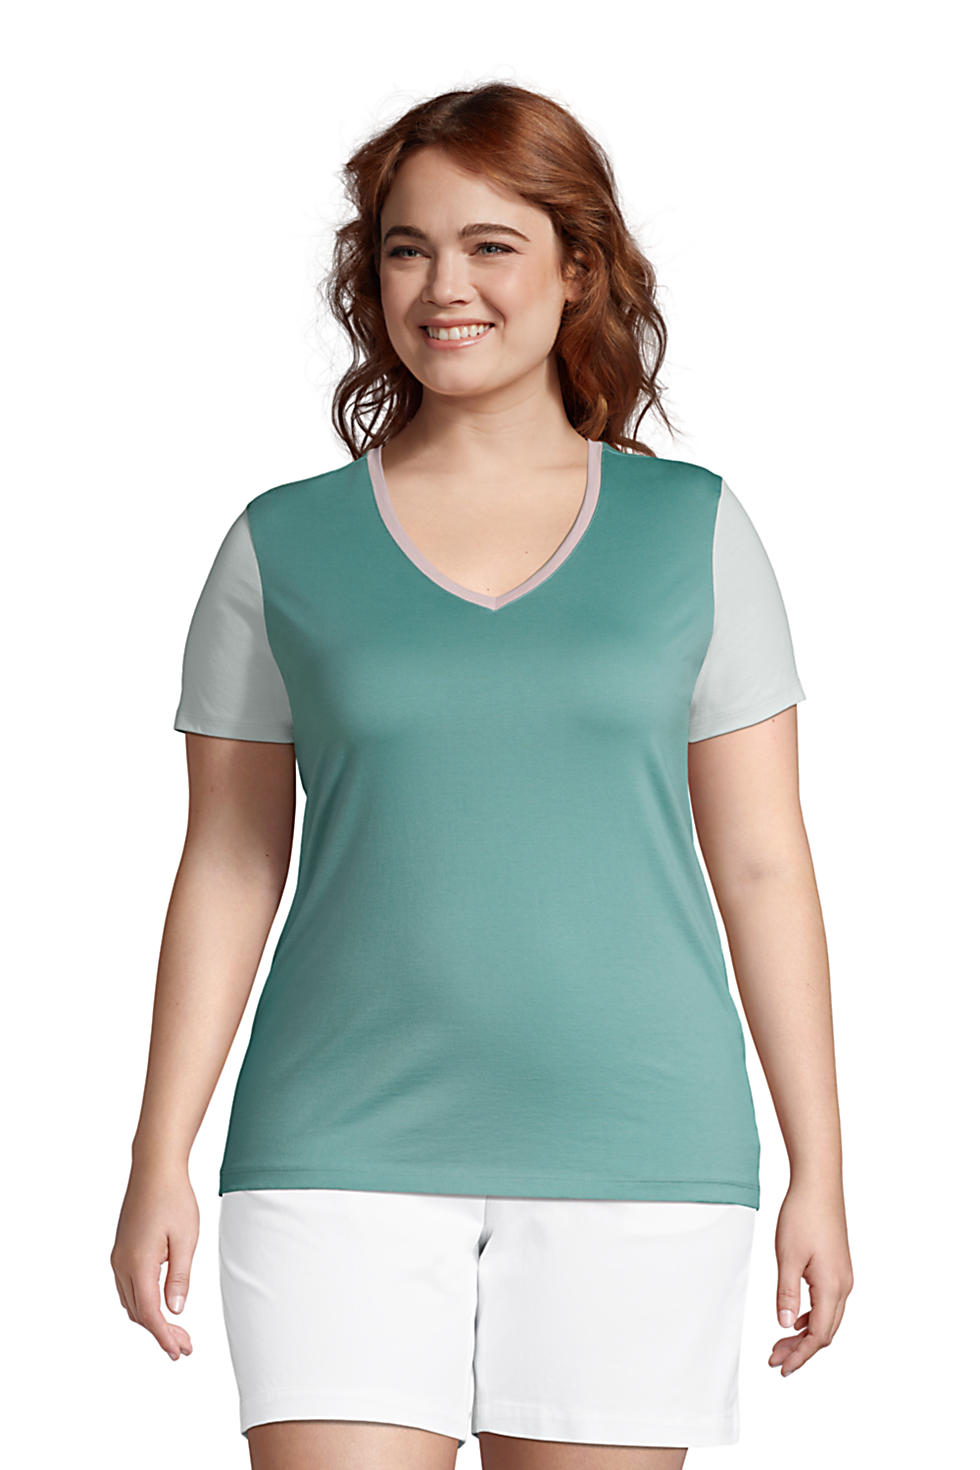 Lands End Women's Plus Size Relaxed Supima Cotton Short Sleeve V-Neck T-Shirt (Teal Shadow Colorblock)